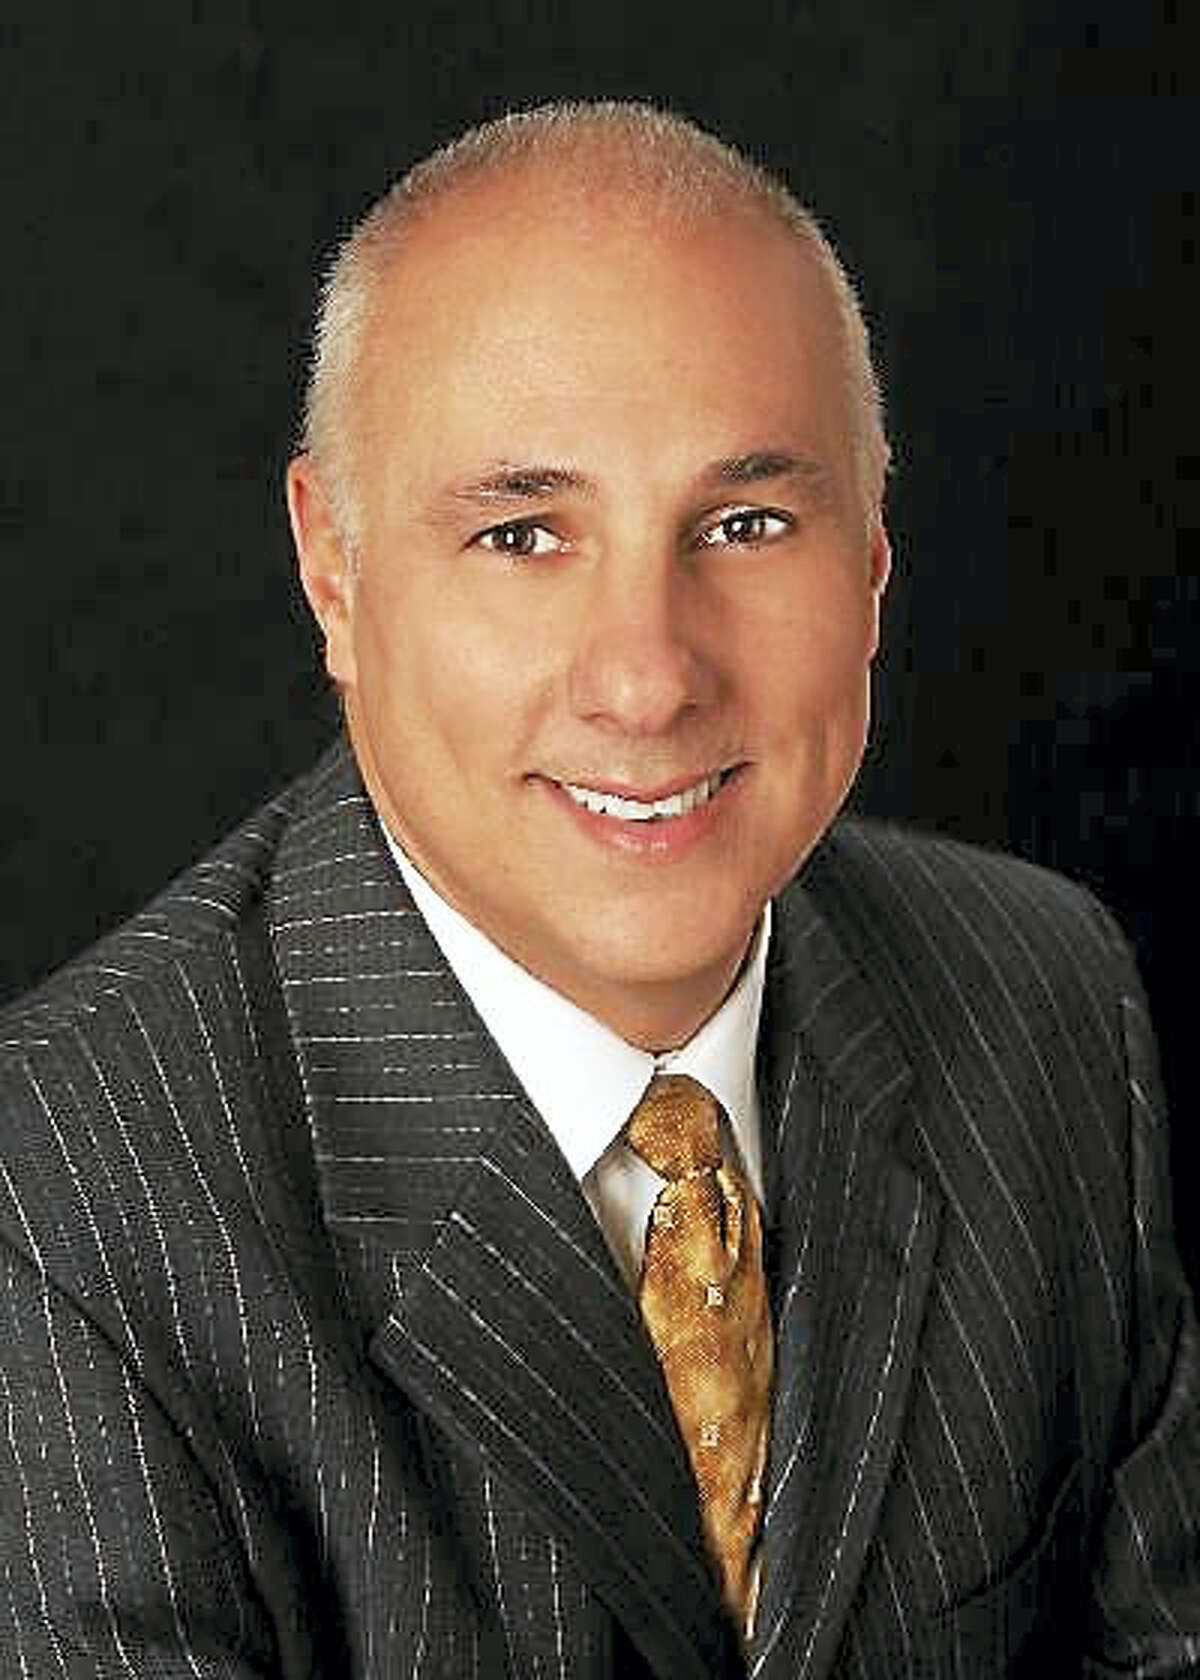 David Gallitto of Middletown, CT has been elected to serve asPresident of The New Haven Middlesex Association of REALTORSÆ(NHMR).David is the Vice President of Sterling Realtors in Middletown. He has been a real estateagent for 13 years and specializes in residential purchases and sales throughout theState of Connecticut. He holds a Bachelor of Arts degree from the University of NotreDame and serves on numerous committees and councils in his local communityincluding that of Chairman of the South Fire District Commission.